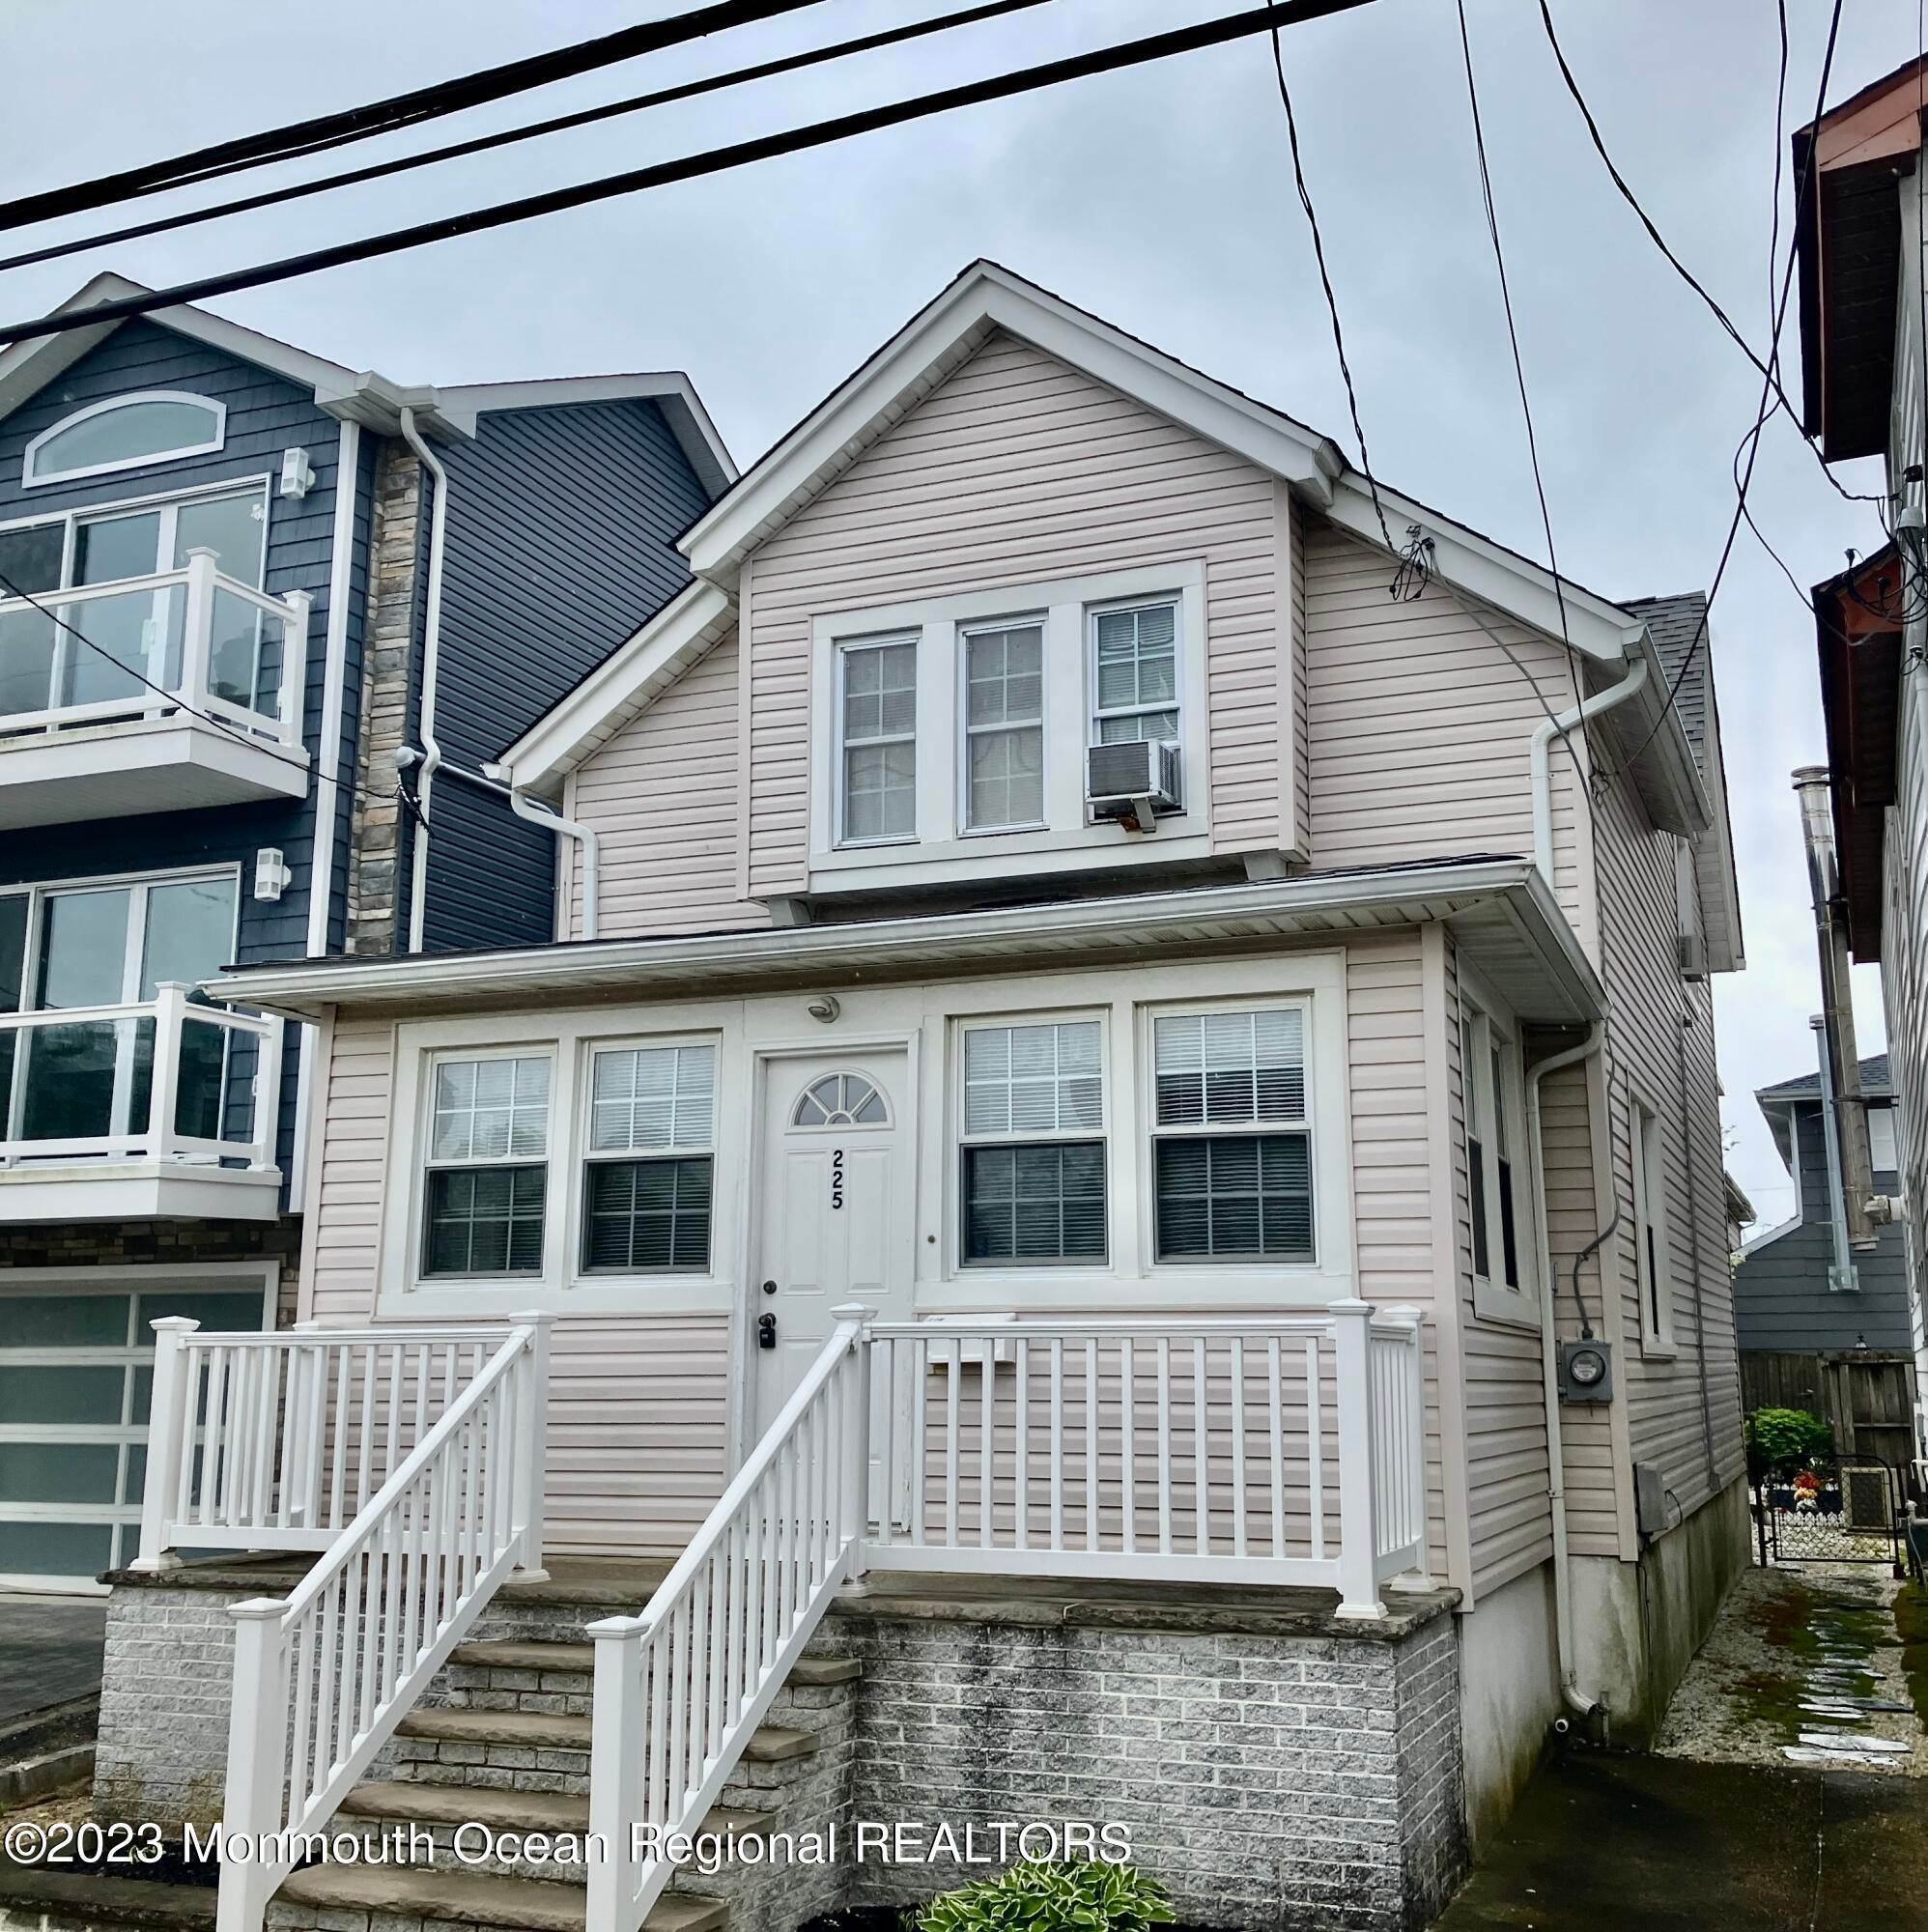 Property for Sale at 225 Sumner Avenue Seaside Heights, New Jersey 08751 United States